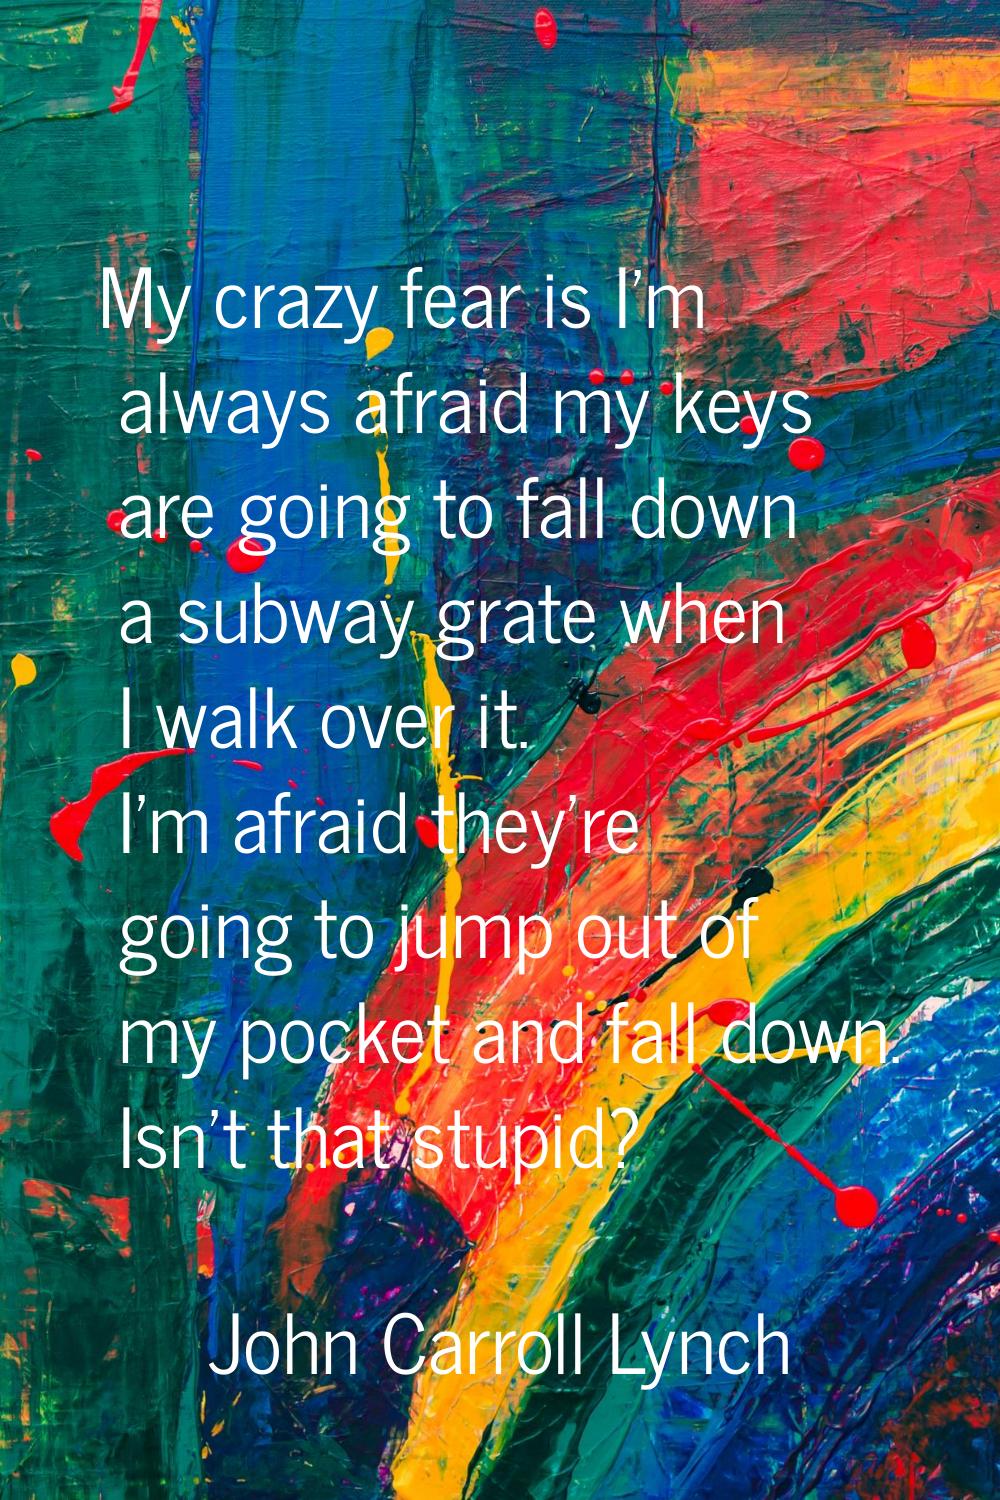 My crazy fear is I'm always afraid my keys are going to fall down a subway grate when I walk over i